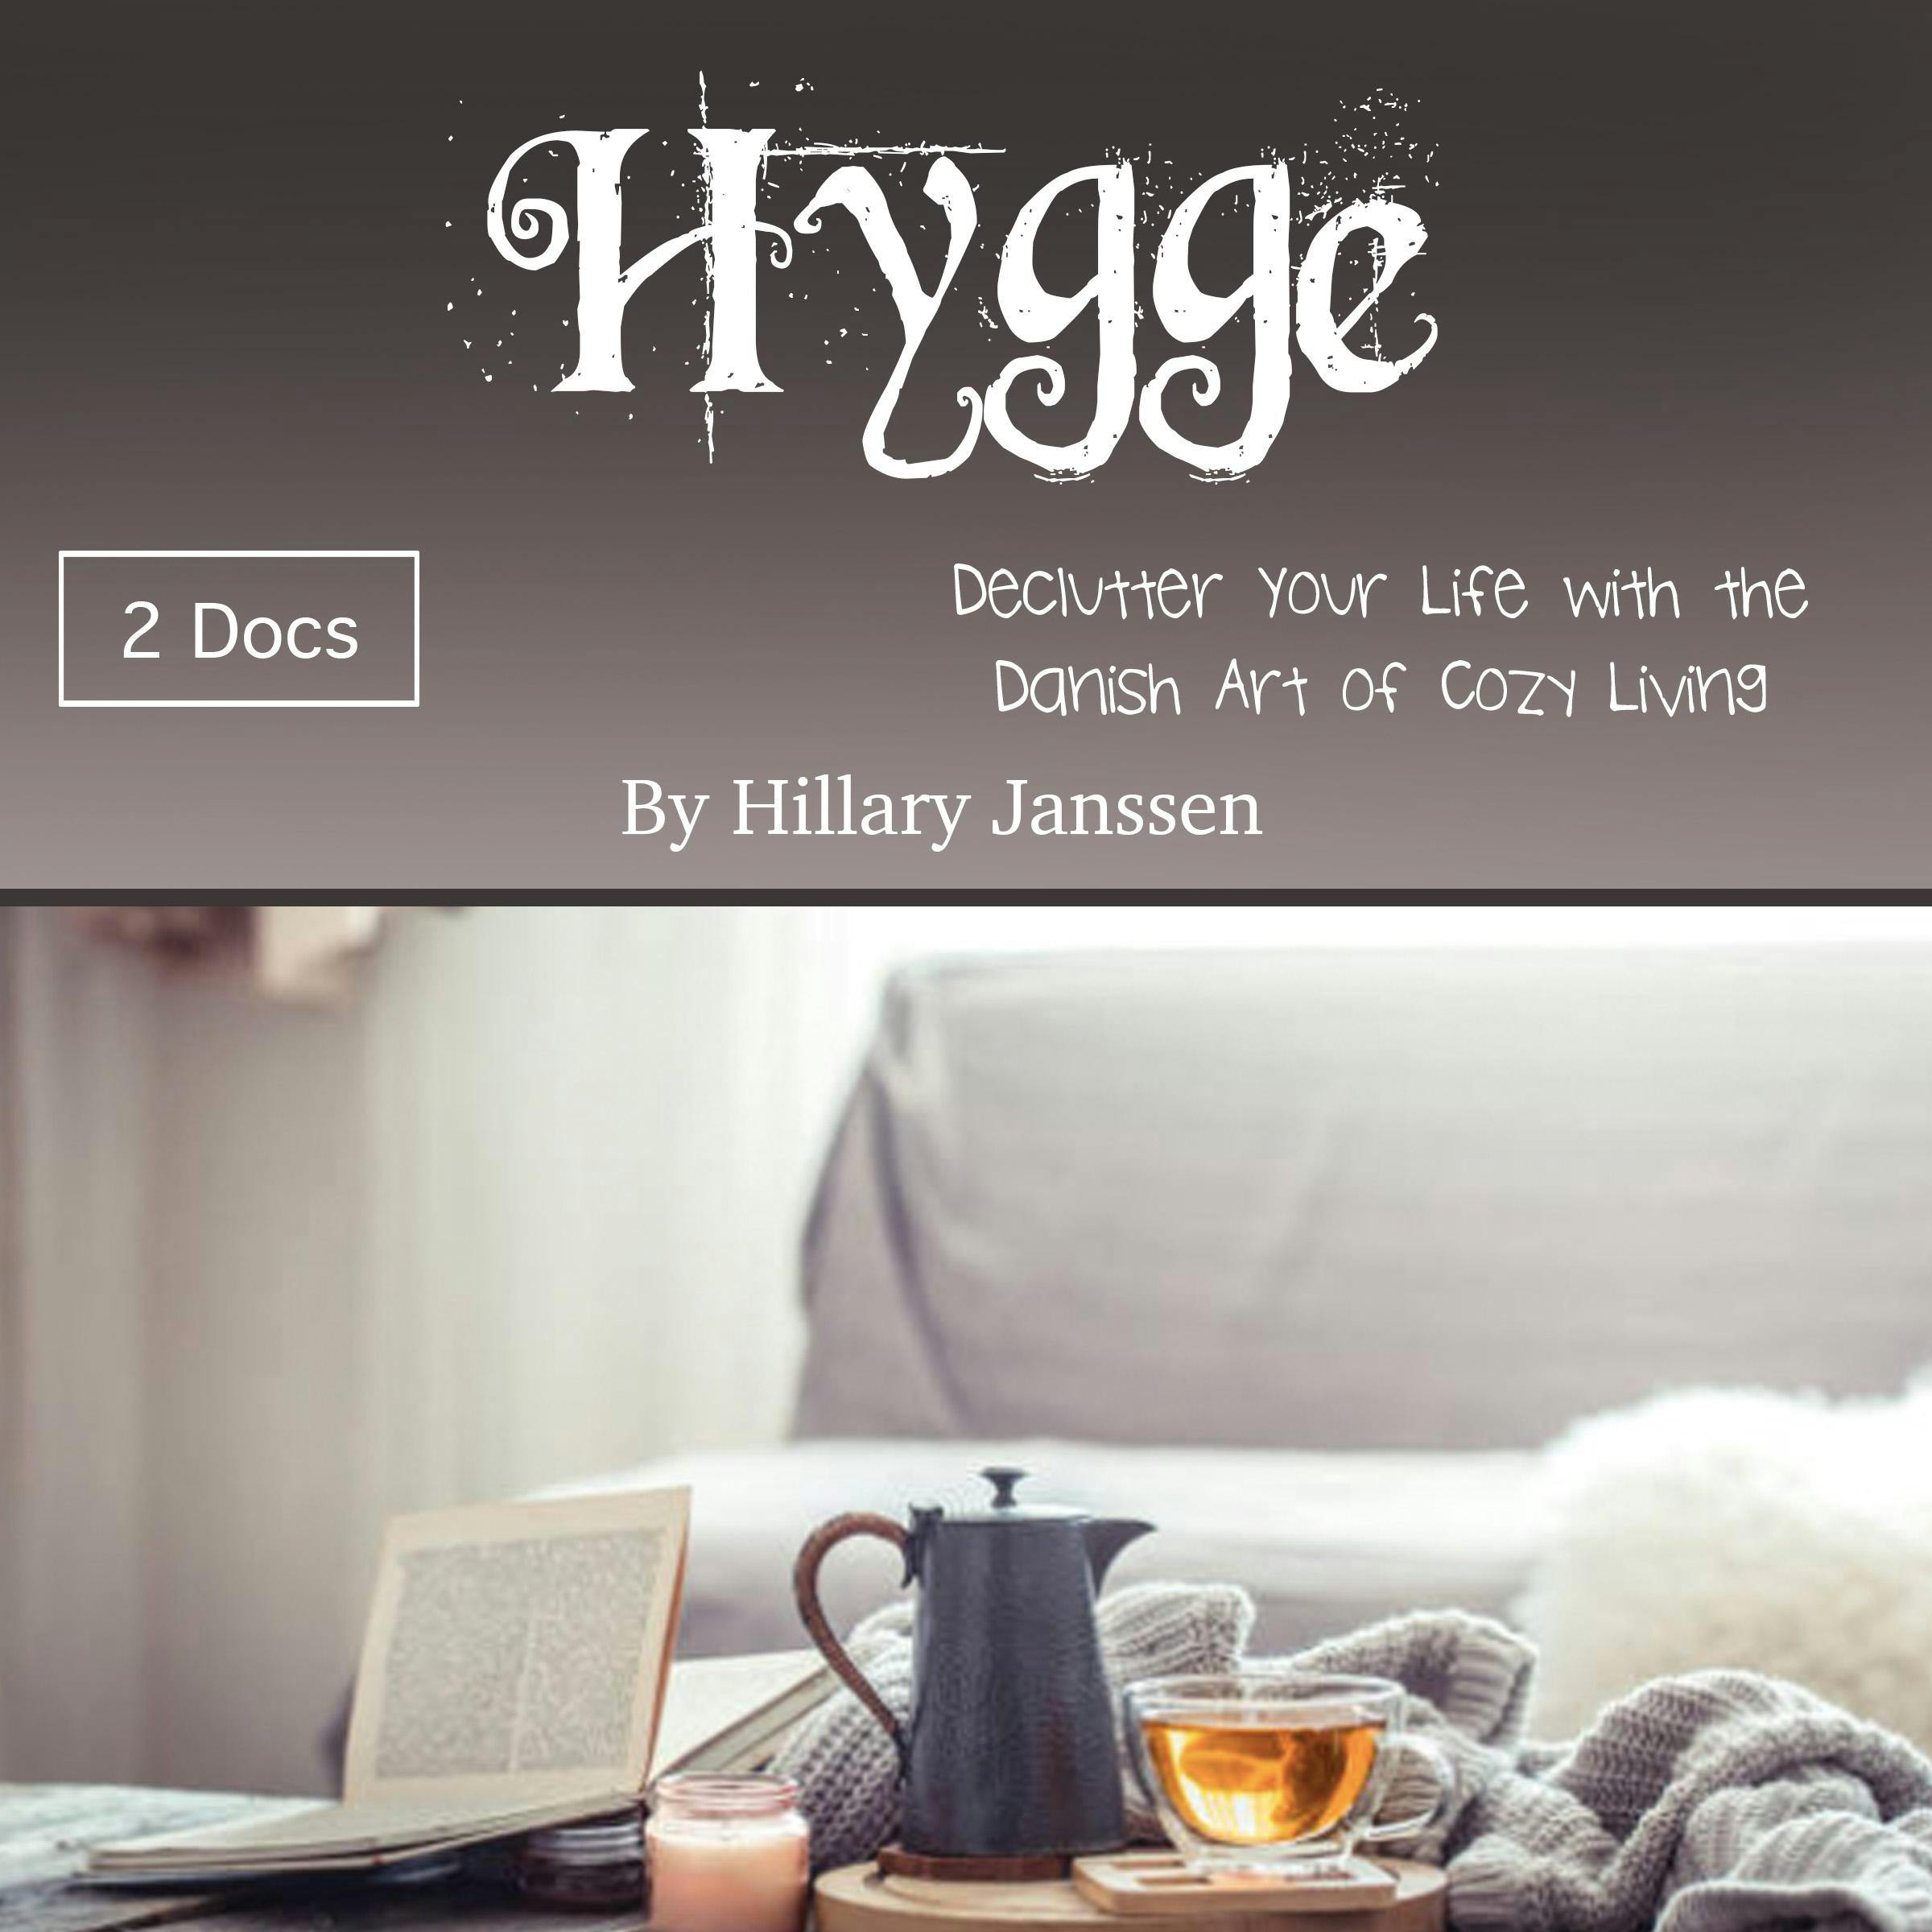 Hygge: Declutter Your Life with the Danish Art of Cozy Living - Hillary Janssen